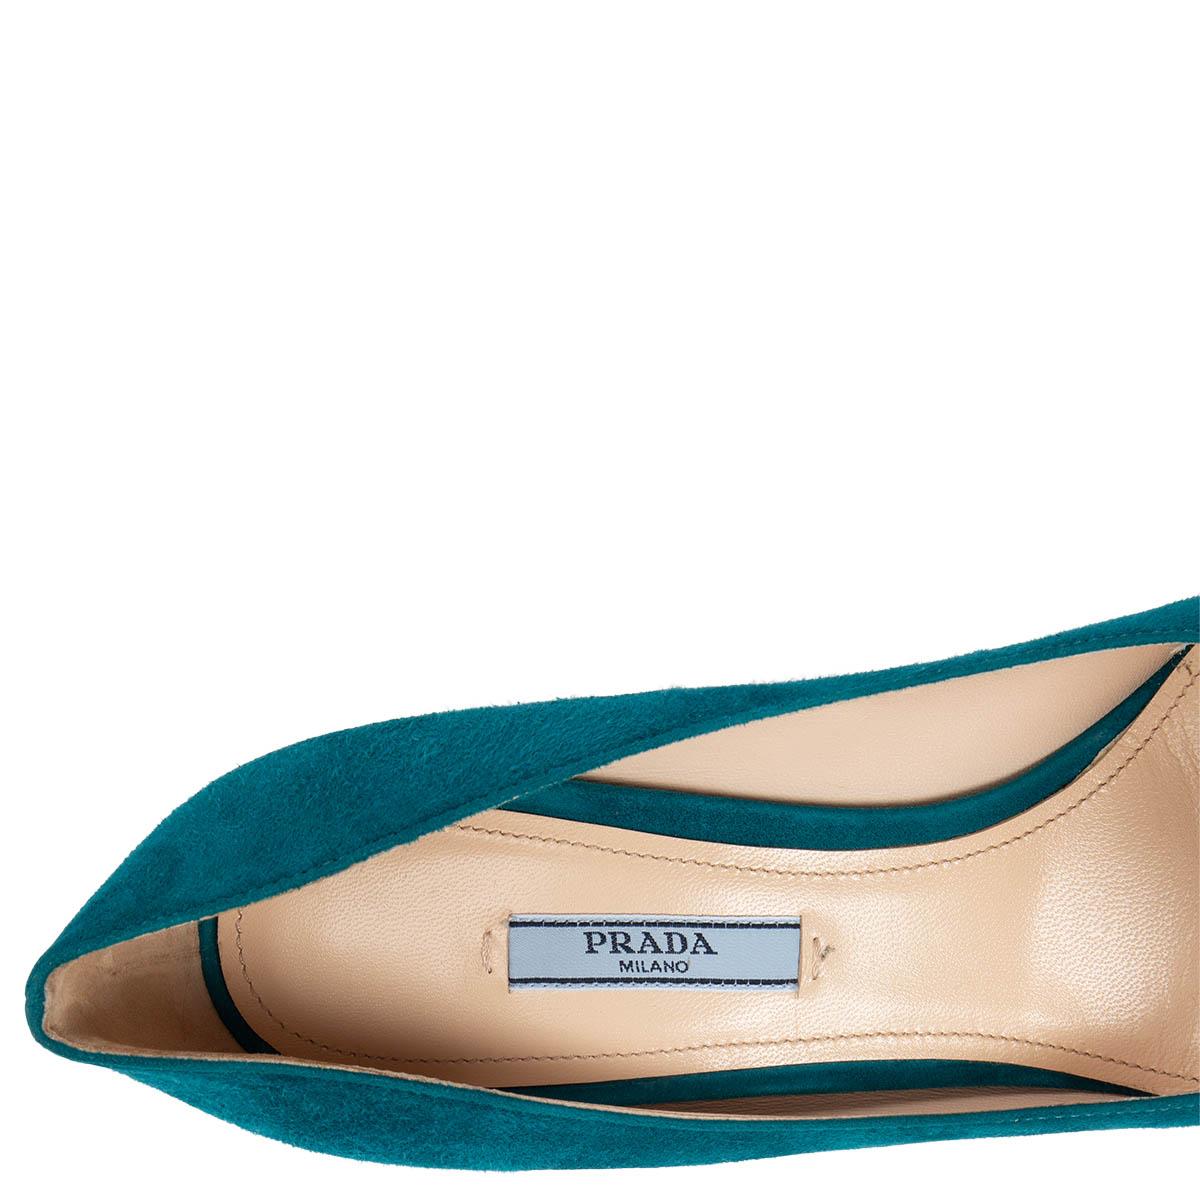 PRADA petrol blue suede CLASSIC Pointed Toe Pumps Shoes 40.5 In Excellent Condition For Sale In Zürich, CH